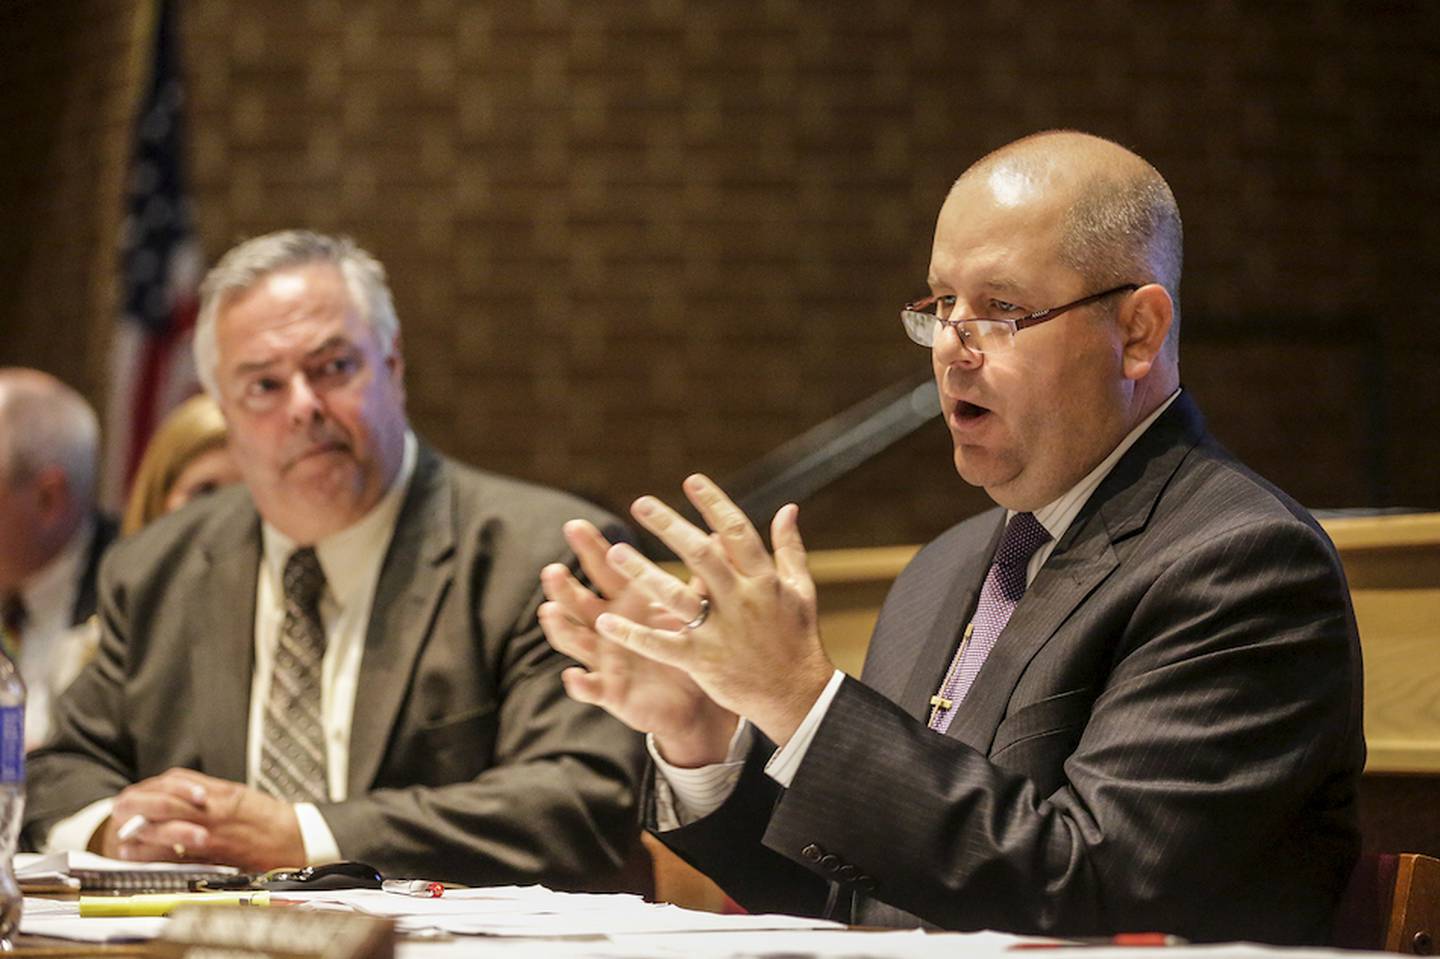 Lincoln-Way Community High School District 210 Superintendent Scott Tingley speaks Thursday about deficit reduction options during a board of education meeting in New Lenox.